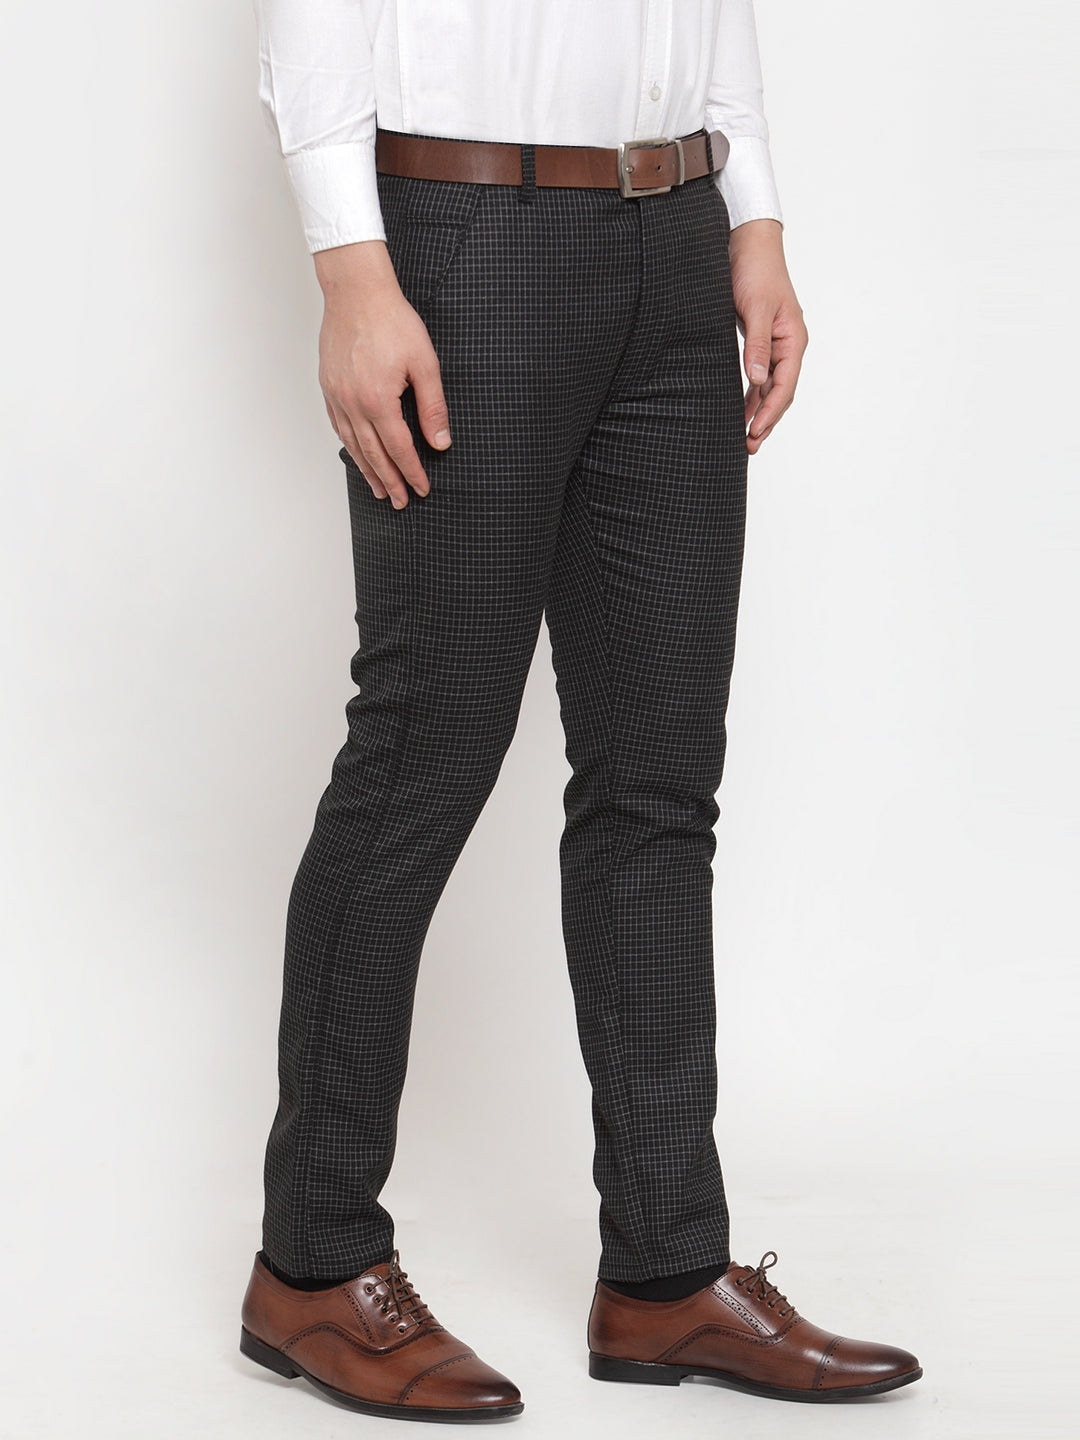 Closed Atelier formal pants